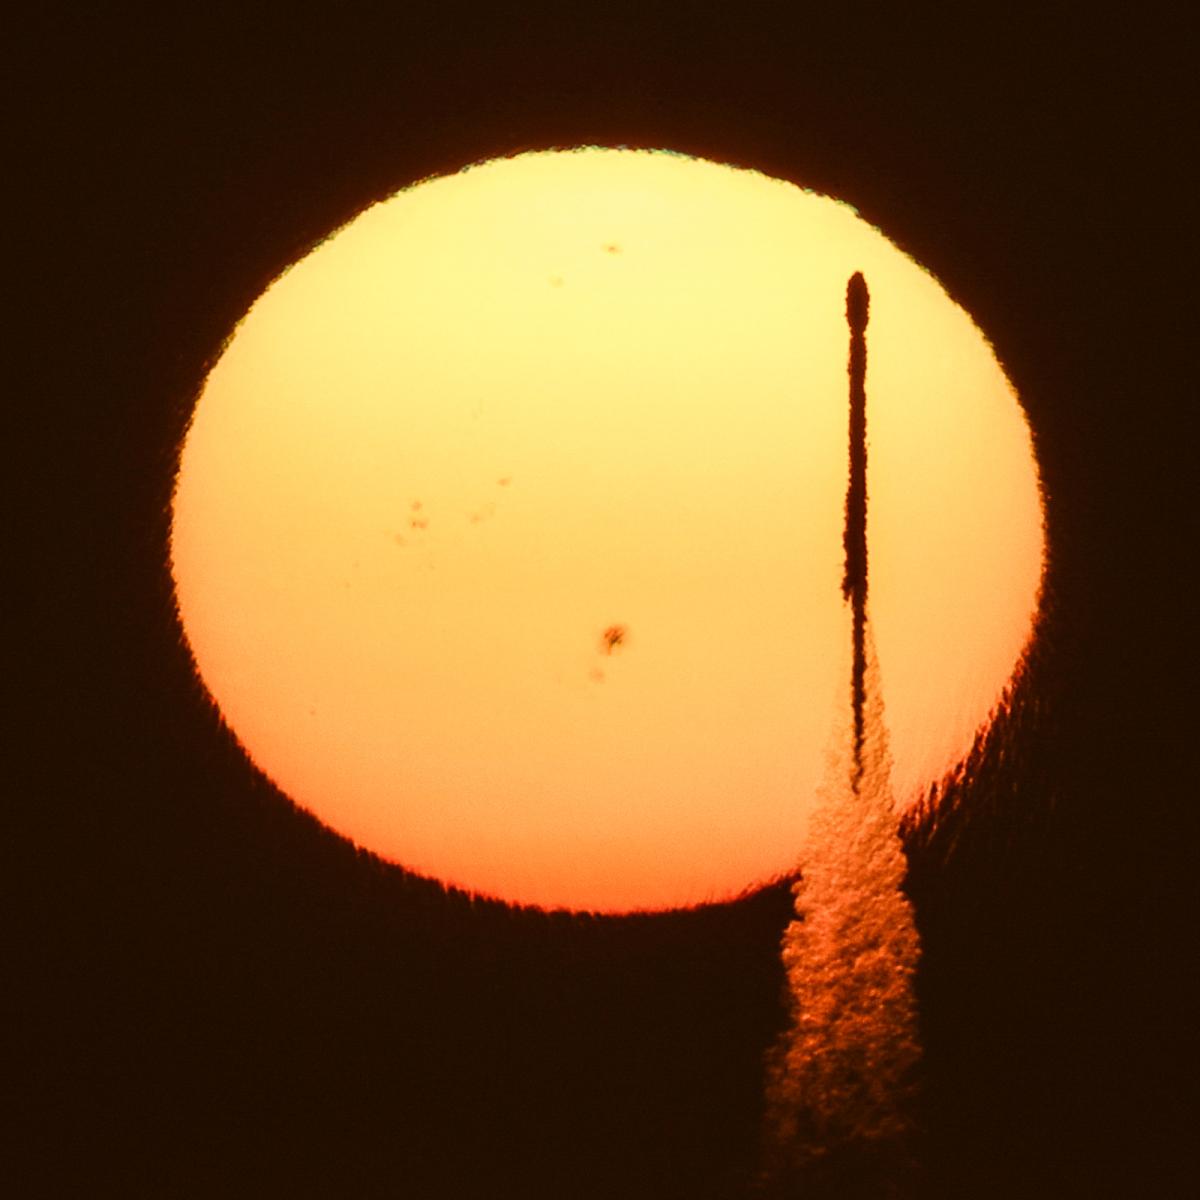 A dramatic photograph showing the launch of a SpaceX Falcon rocket. The rocket is picked out in dark silhouette against a setting Sun, with a hazy stream from the jet engines bursting out beneath like bubbles